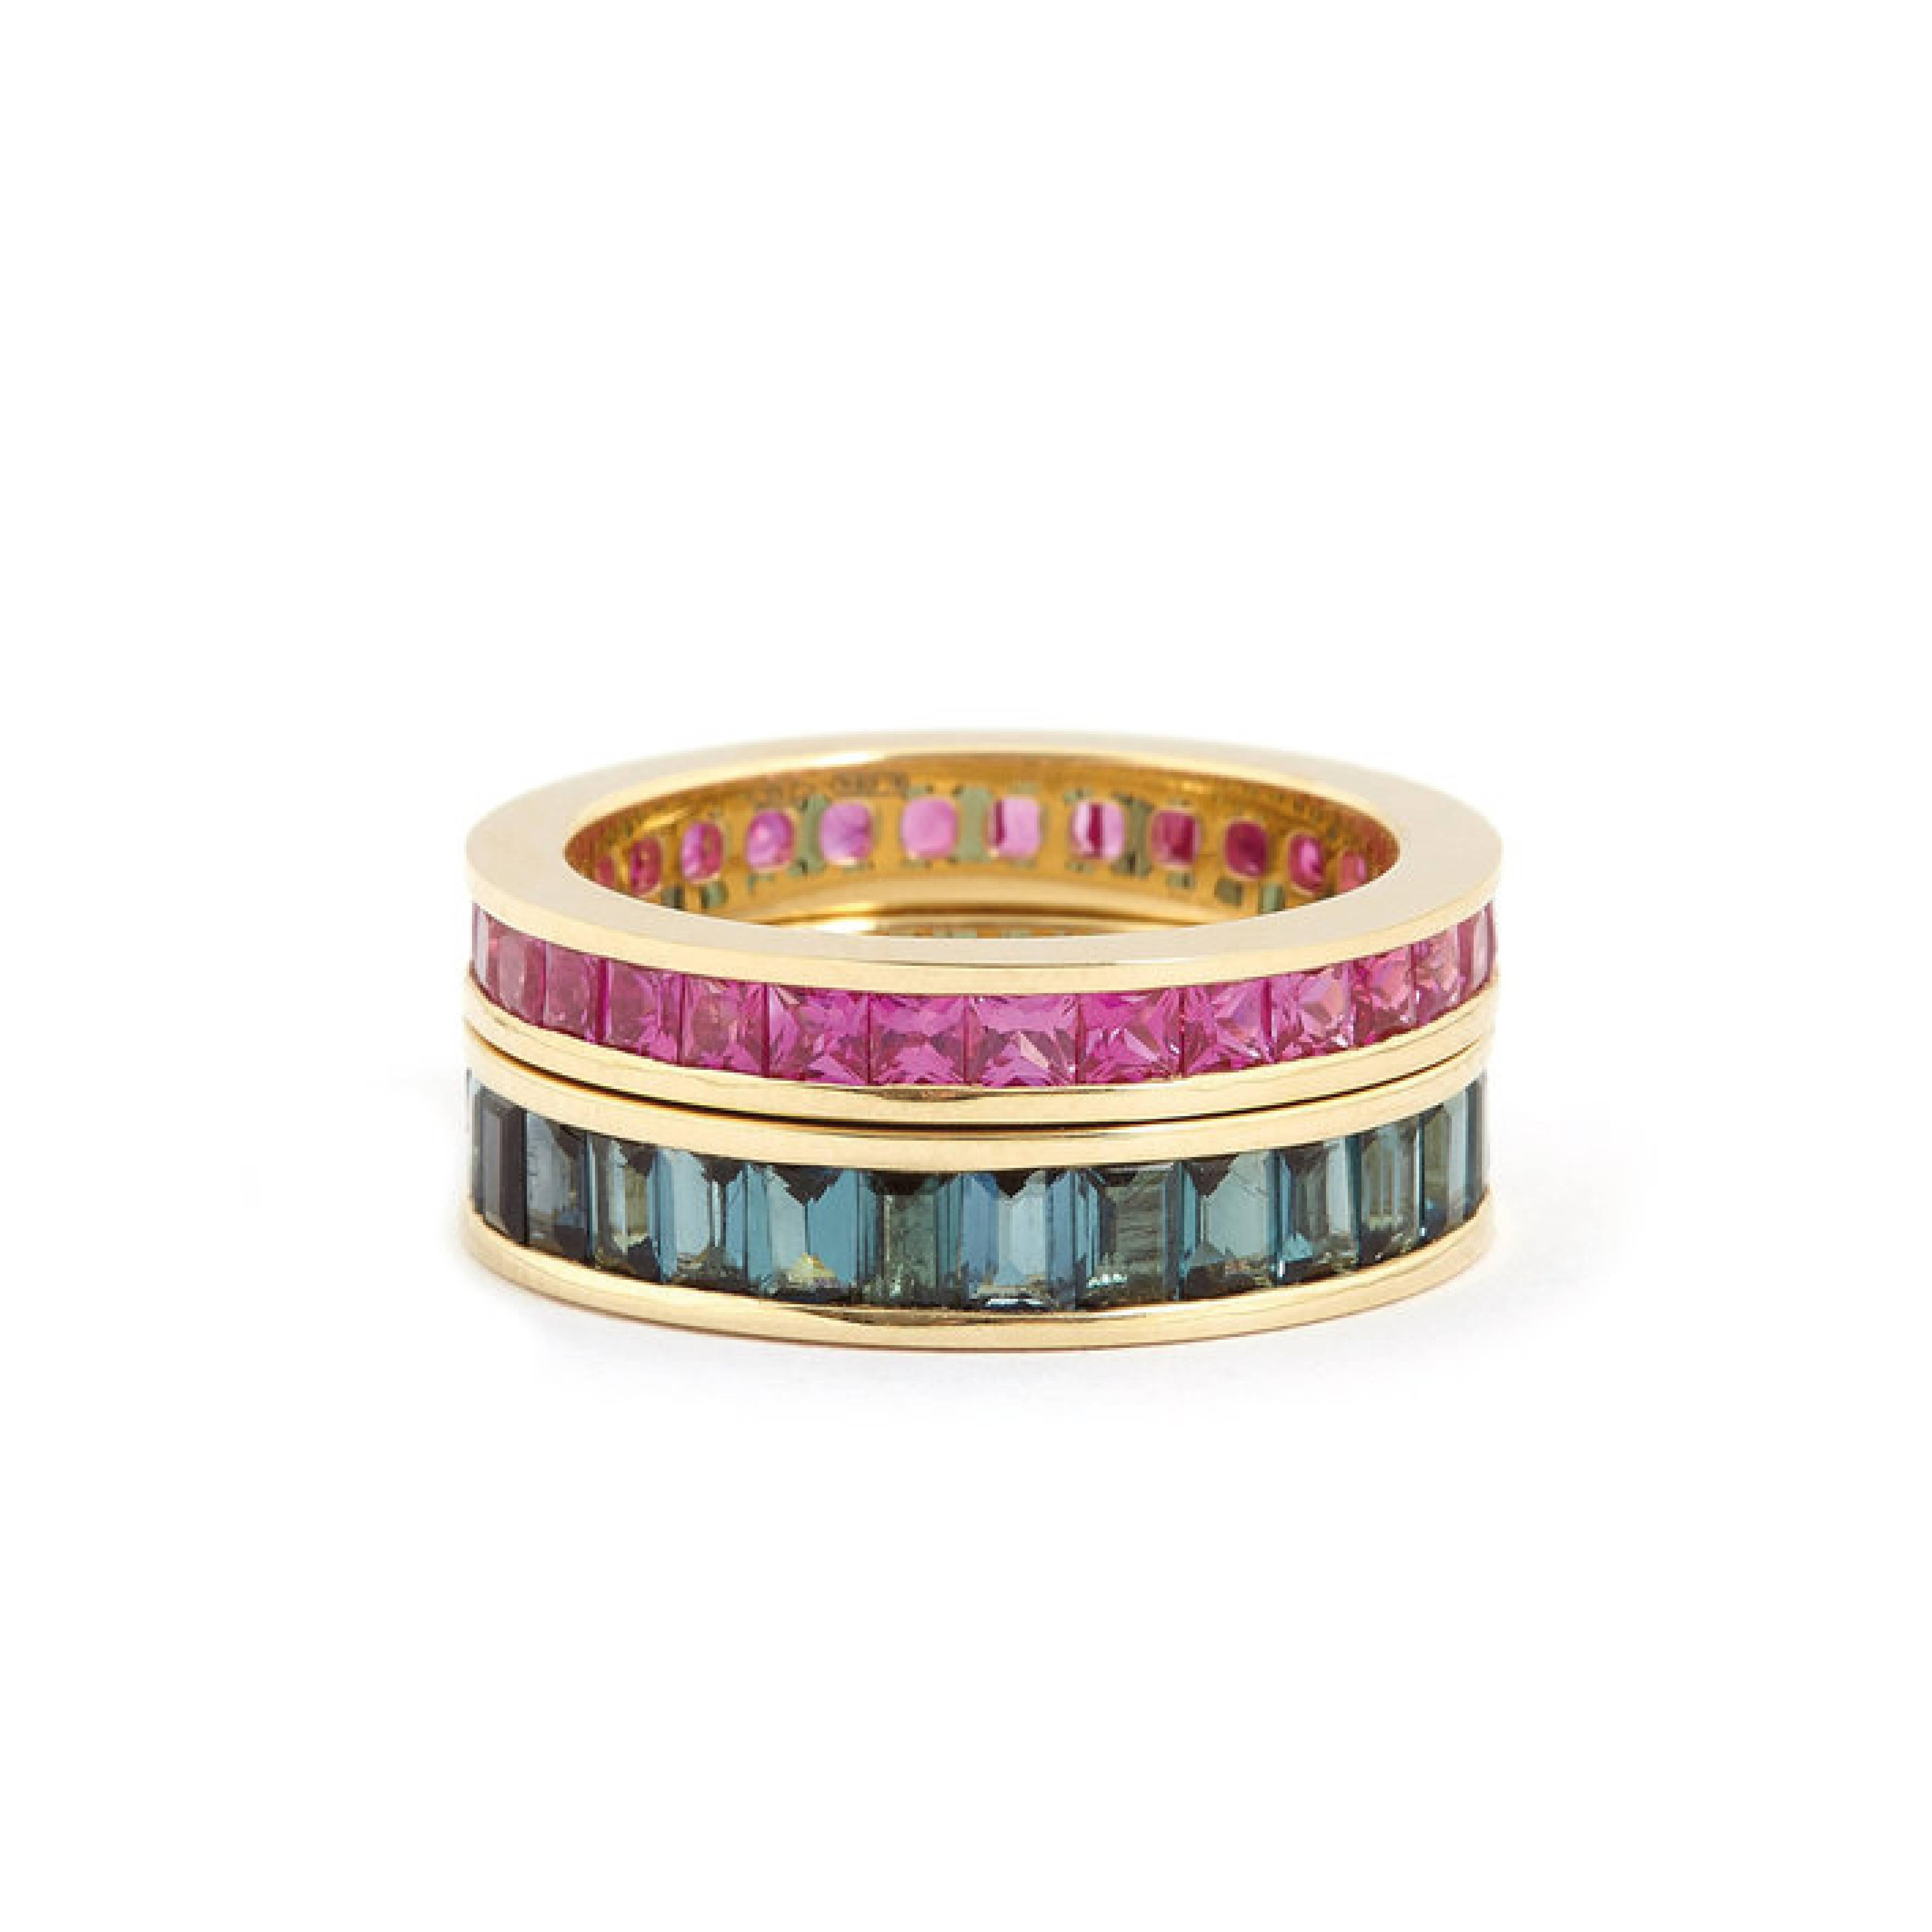 Eternity ring invisibly-set with a rare blue color tourmaline set in 18k yellow gold; channel set all the way around. Approx. weight is 3.2 carat. Crafted by master craftsmen in Italy.

Fouché bespoke band rings are created according to your band